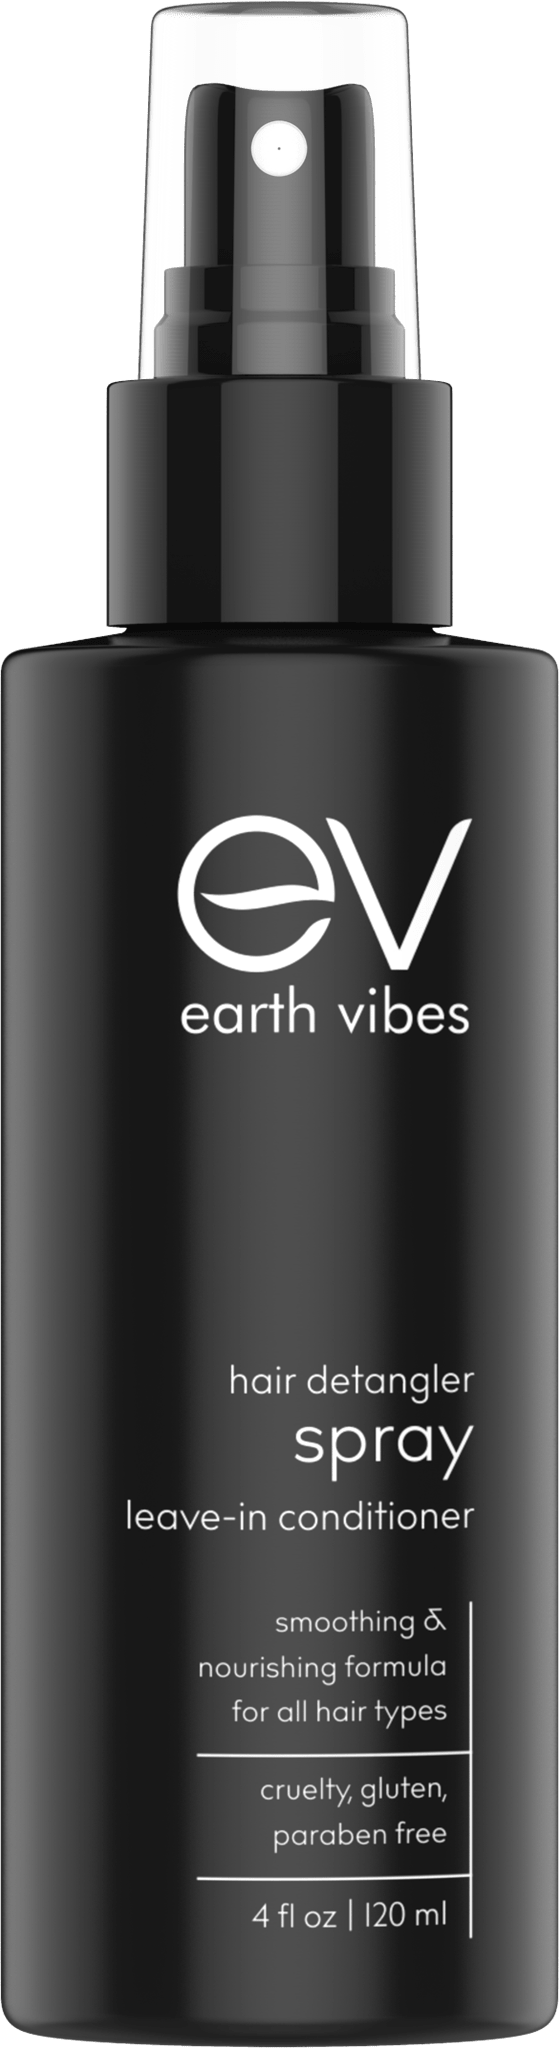 Earth Vibes Natural Hair Detangler, Leave-In Conditioner Spray For Kids & Adults - All Hair Types - Color Safe Cruelty, Sulfate - Paraben Free - Made With Organic Jojoba And Avocado Oil